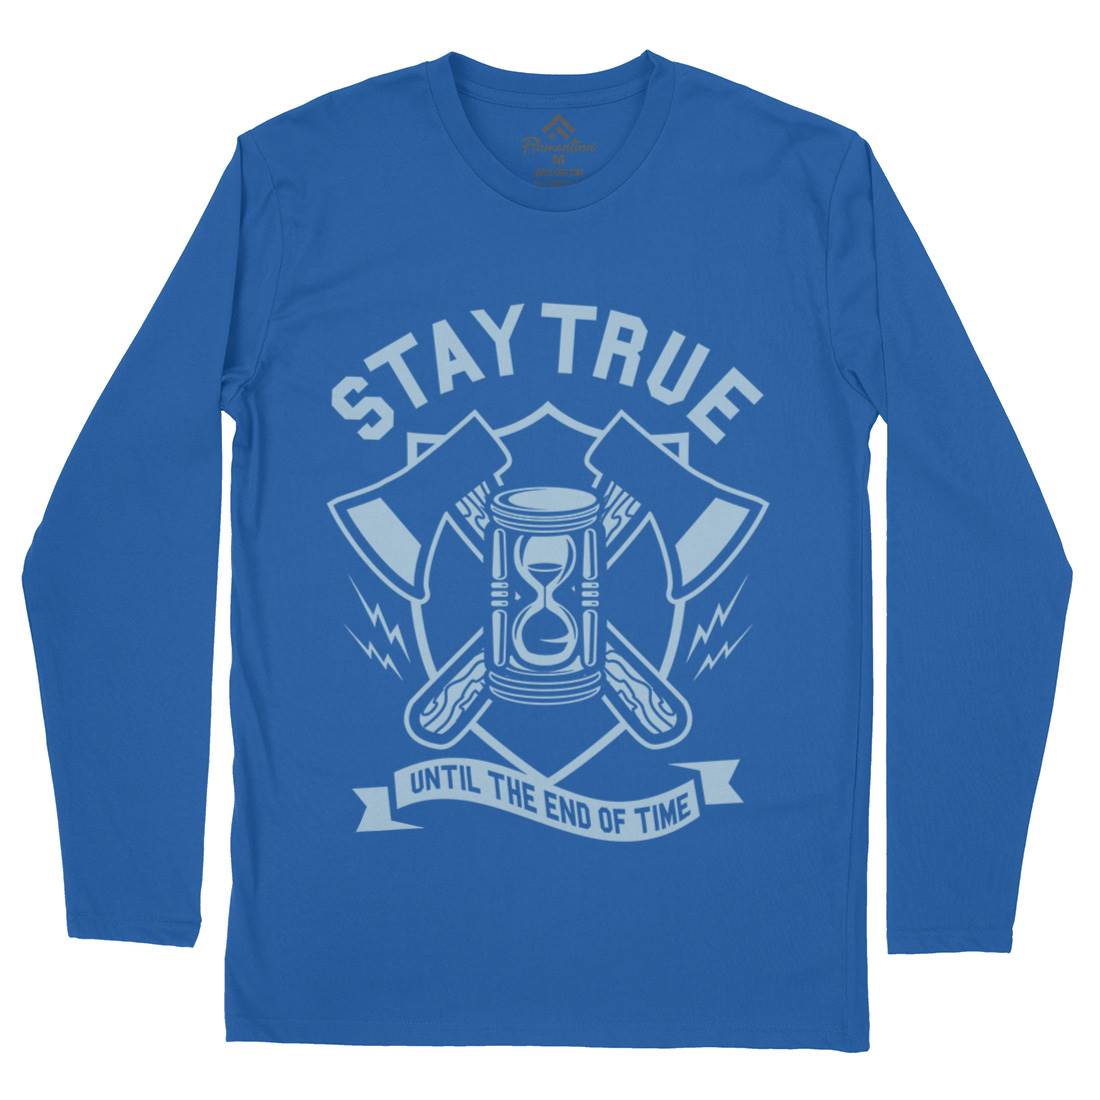 Stay True Mens Long Sleeve T-Shirt Quotes A285